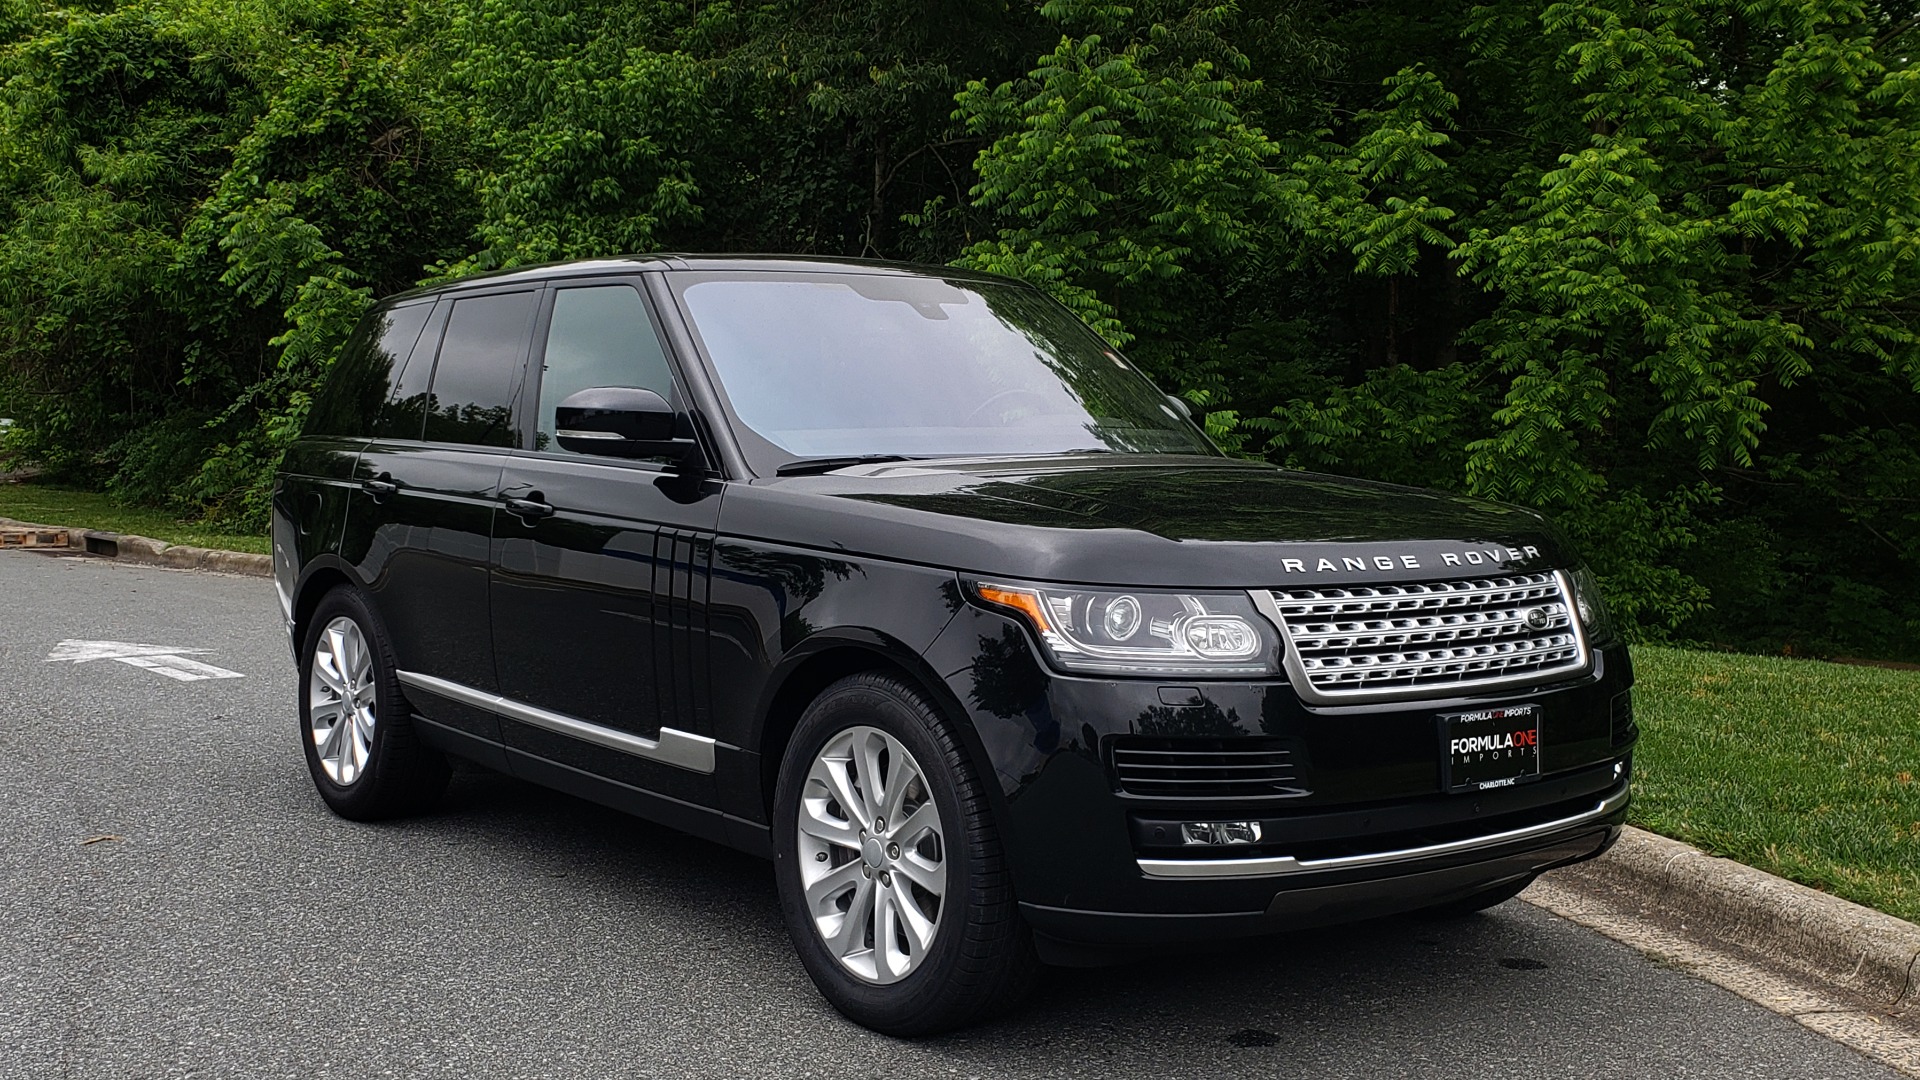 Used 2016 Land Rover RANGE ROVER HSE 3.0L / NAV / PANO-ROOF / VENT SEATS / REARVIEW / BLIND SPOT for sale $47,995 at Formula Imports in Charlotte NC 28227 6